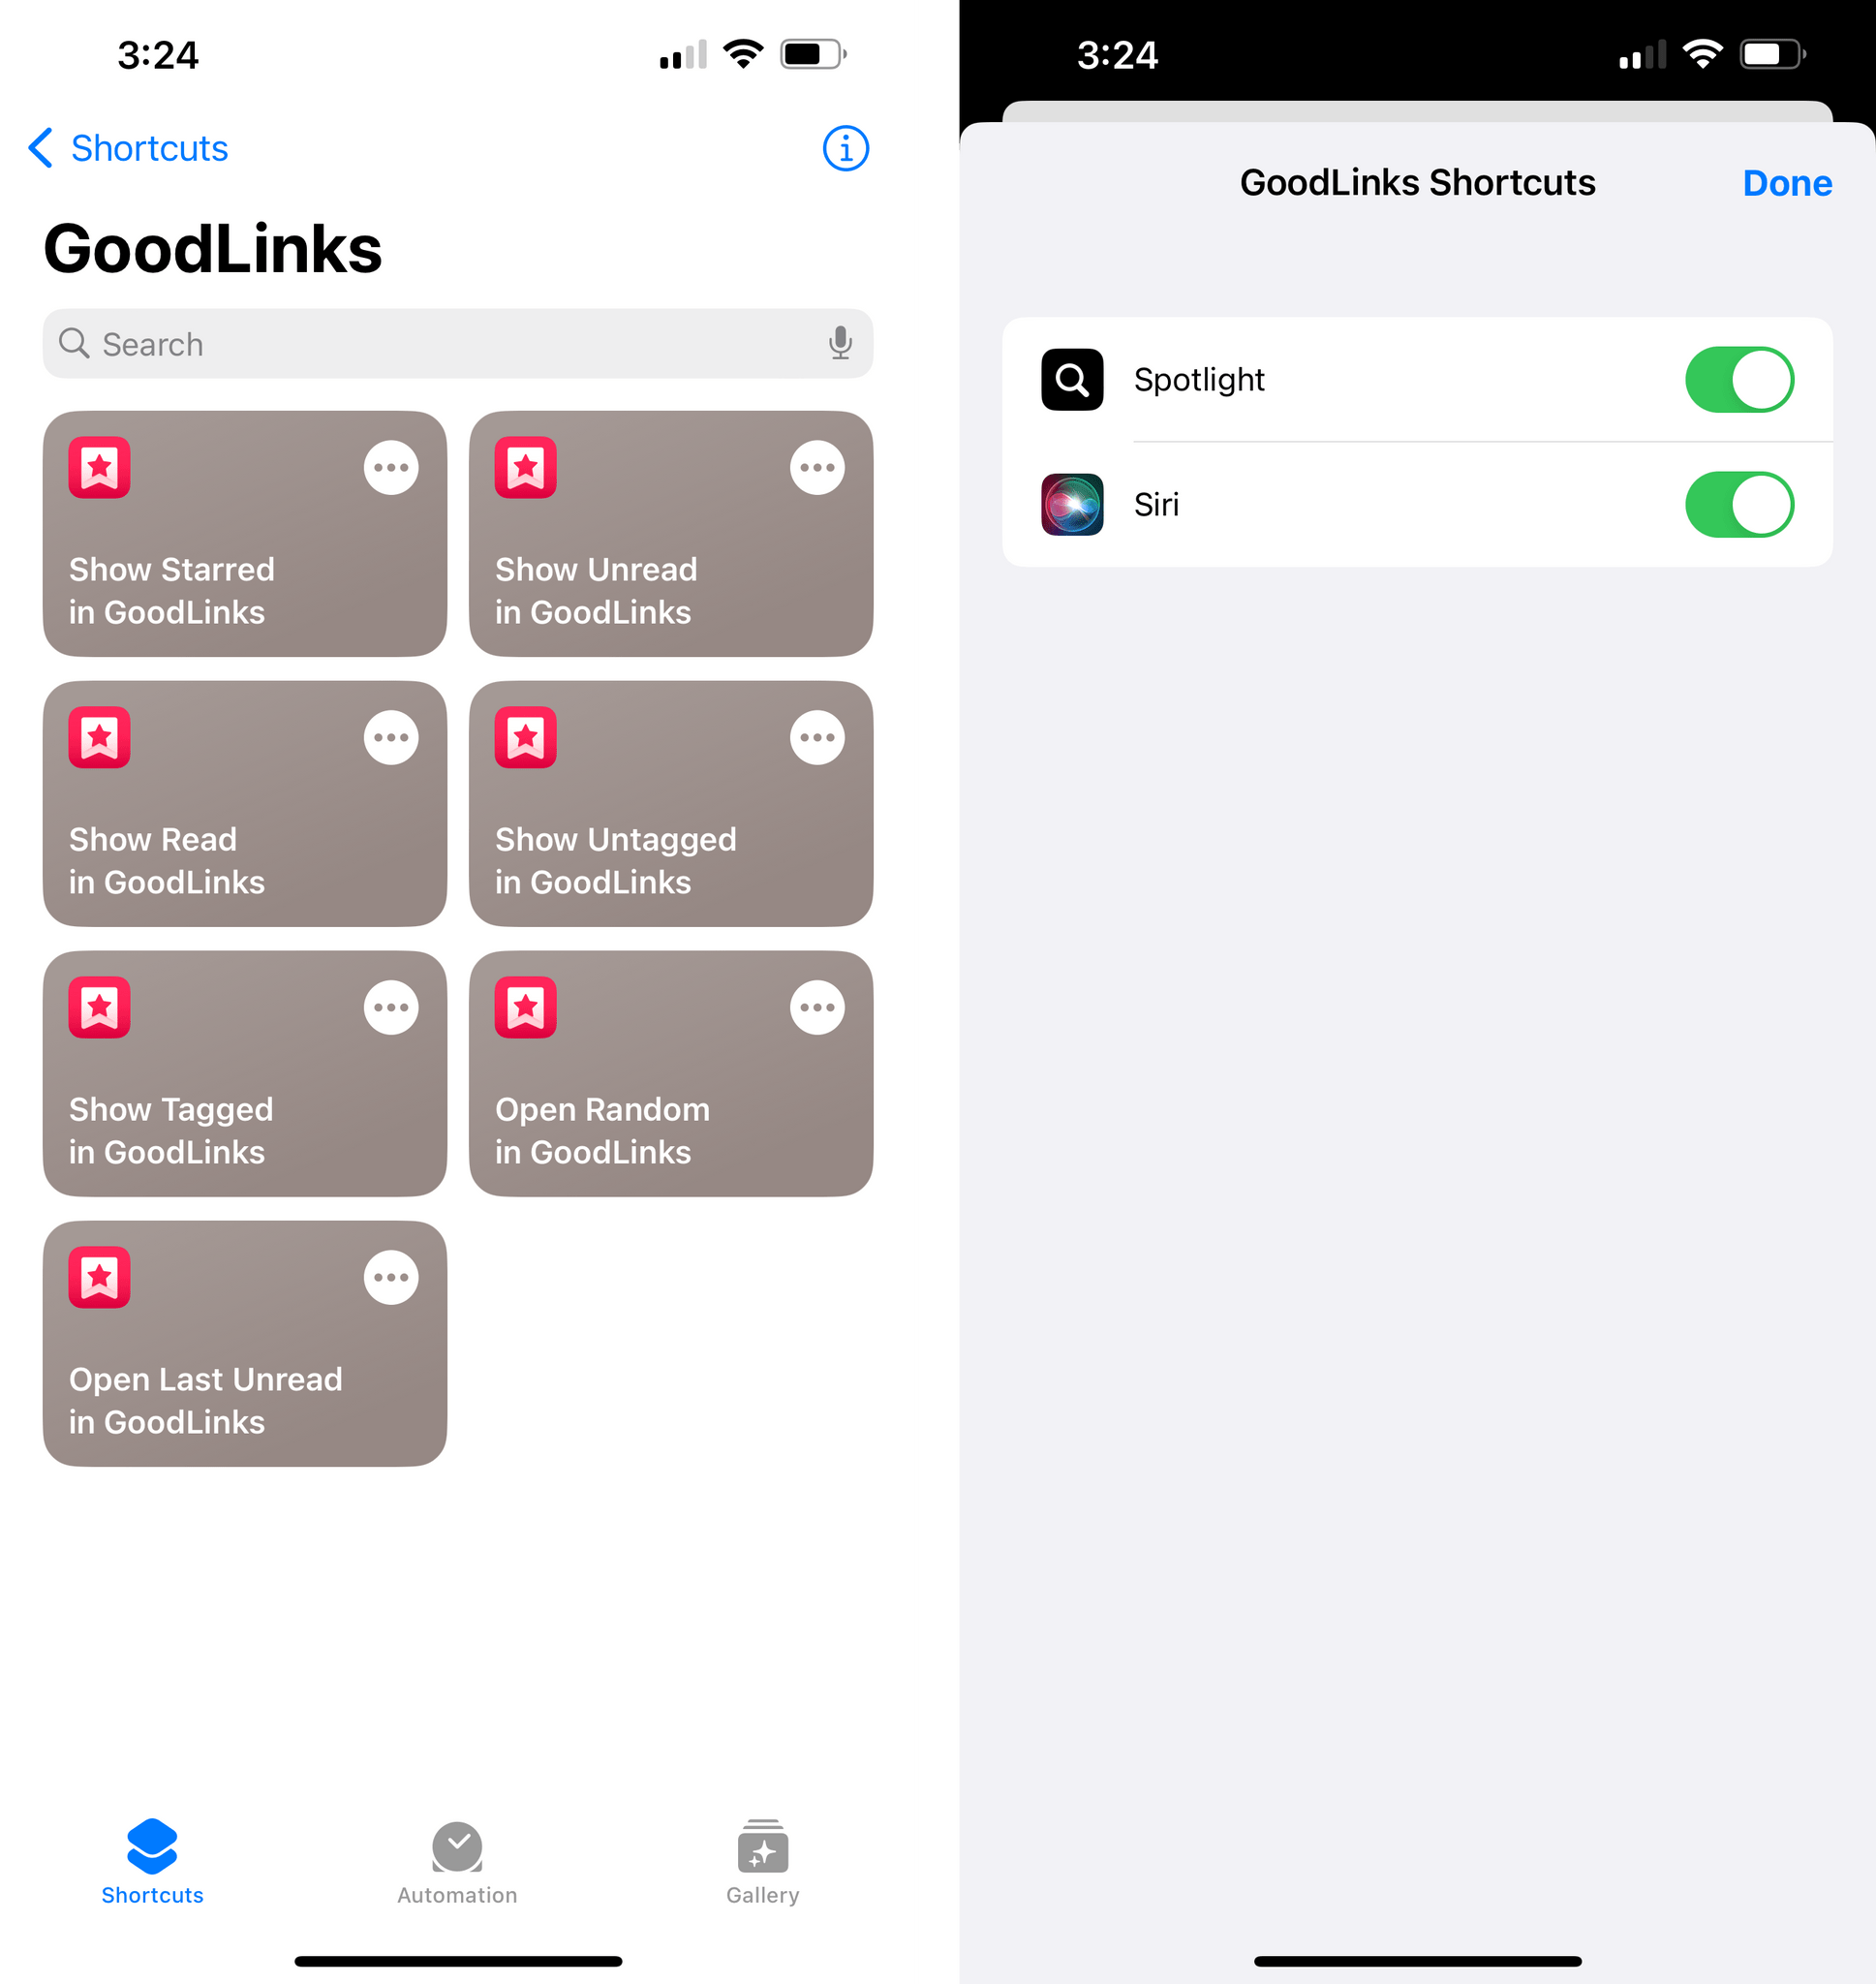 If you want, you can hide an app's App Shortcuts from Siri or Spotlight by pressing the 'i' button in the app's dedicated section.